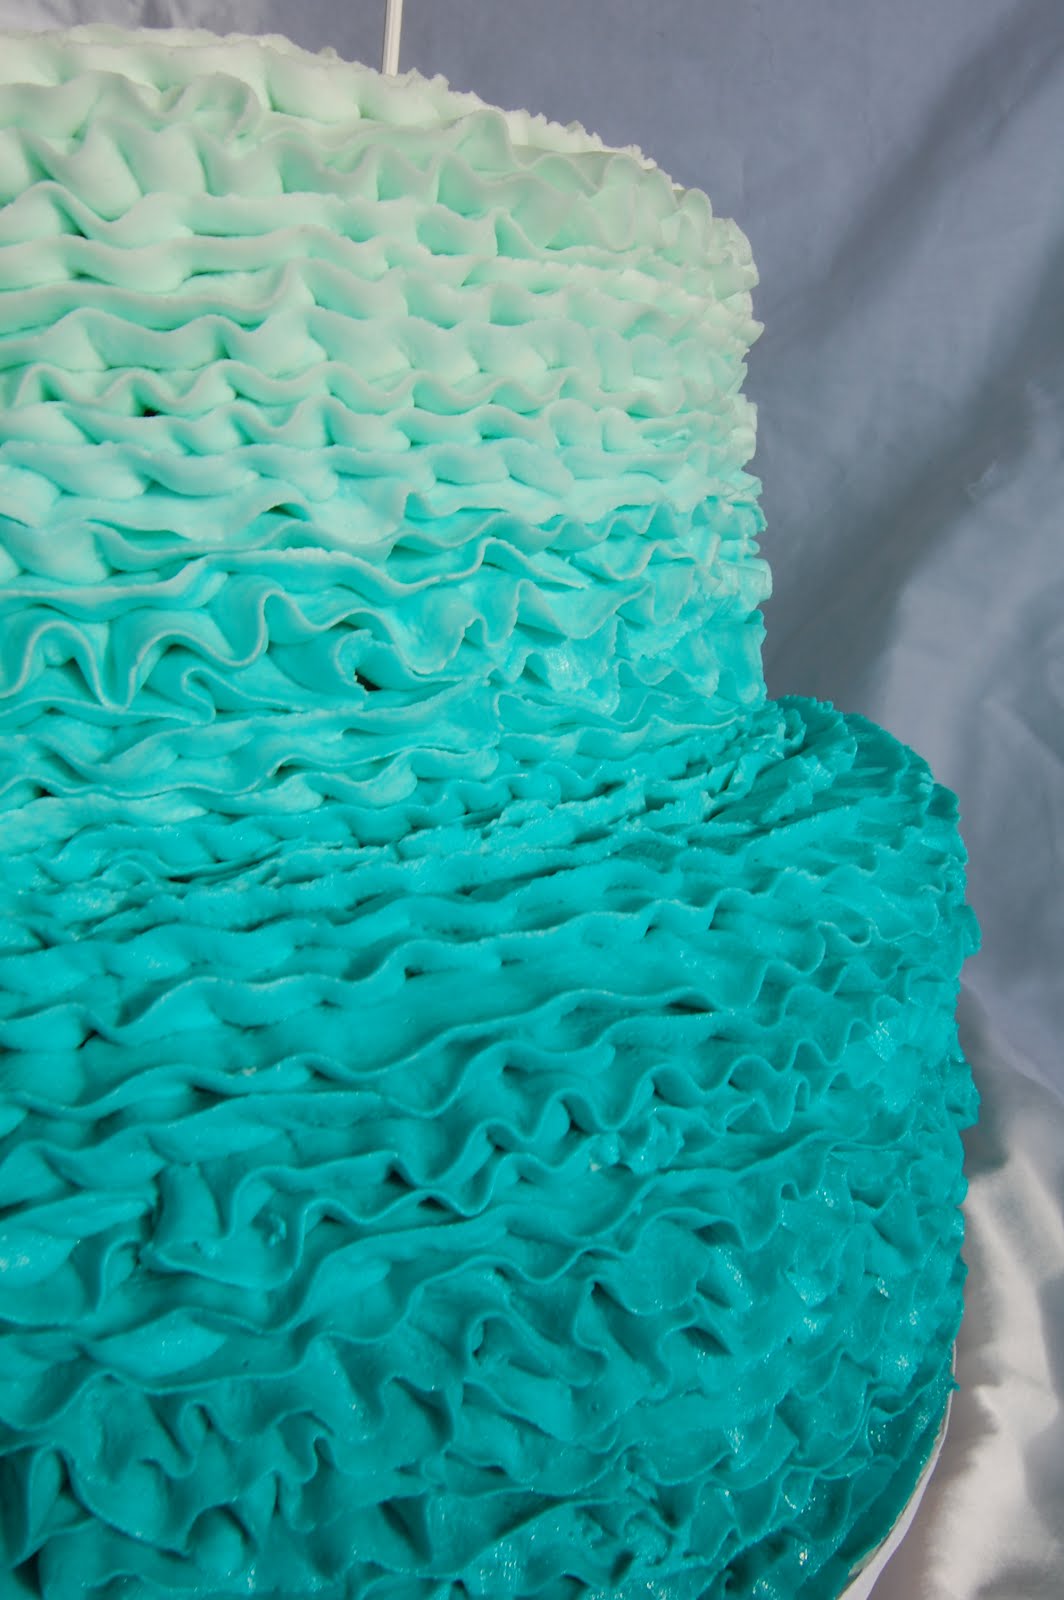 Teal Ombre Birthday Cake Roses